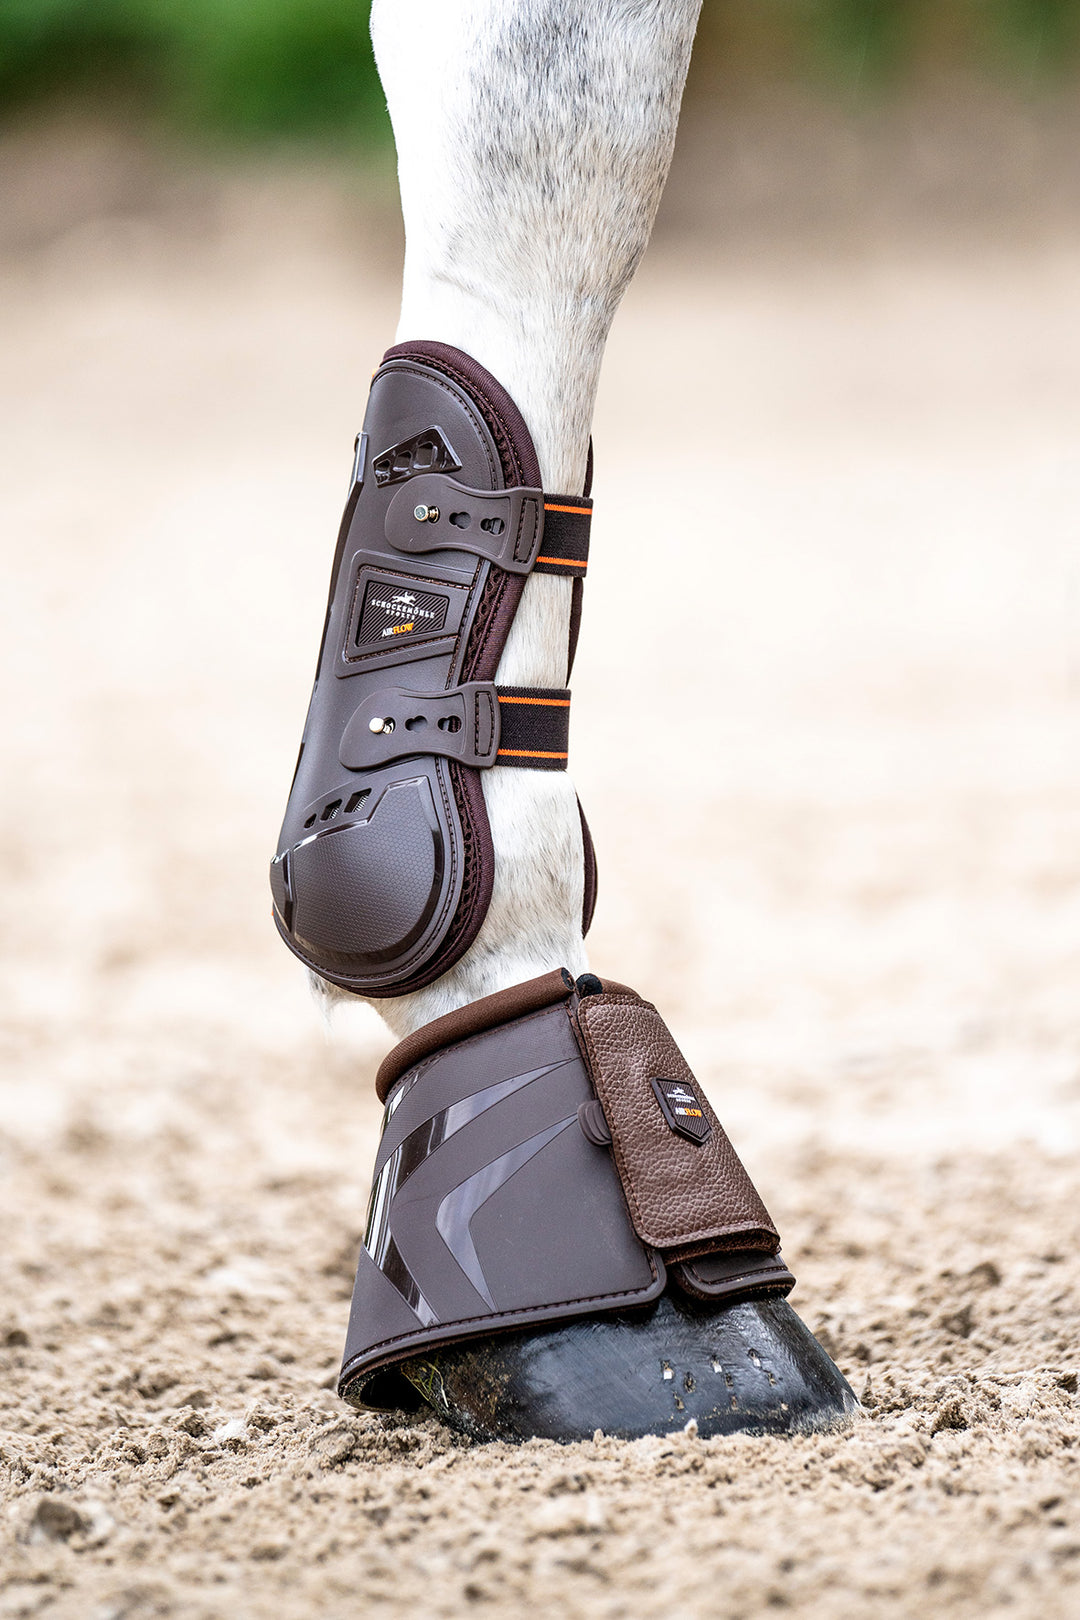 Schockemohle Air Flow Champion Tendon Boots, Brown